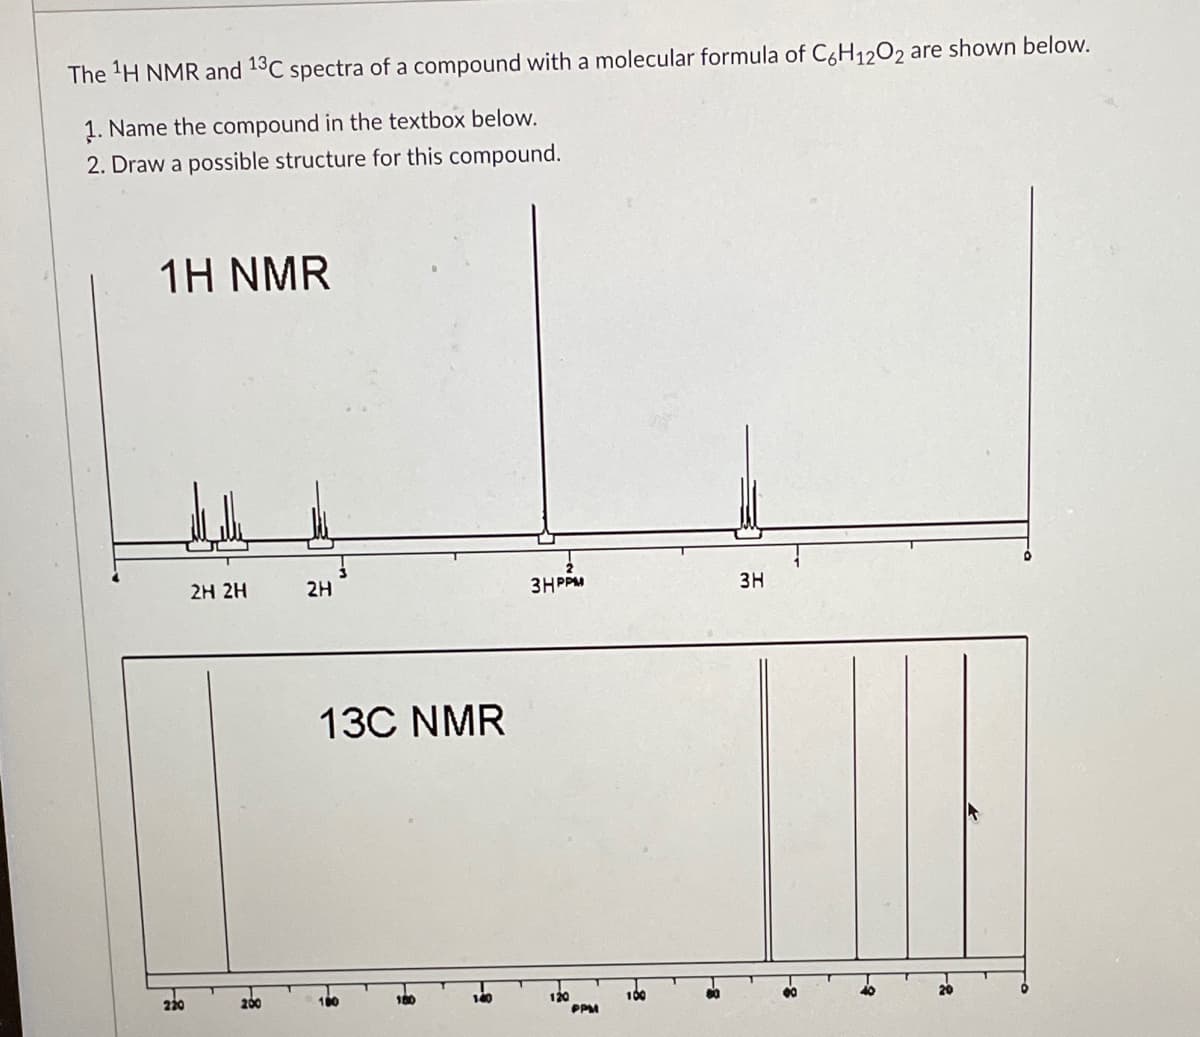 The 'H NMR and 13C spectra of a compound with a molecular formula of C&H12O2 are shown below.
1. Name the compound in the textbox below.
2. Draw a possible structure for this compound.
1Η NMR
2H 2H
2H
3H PPM
3H
13C NMR
220
200
100
180
140
120
PPM
100
20
